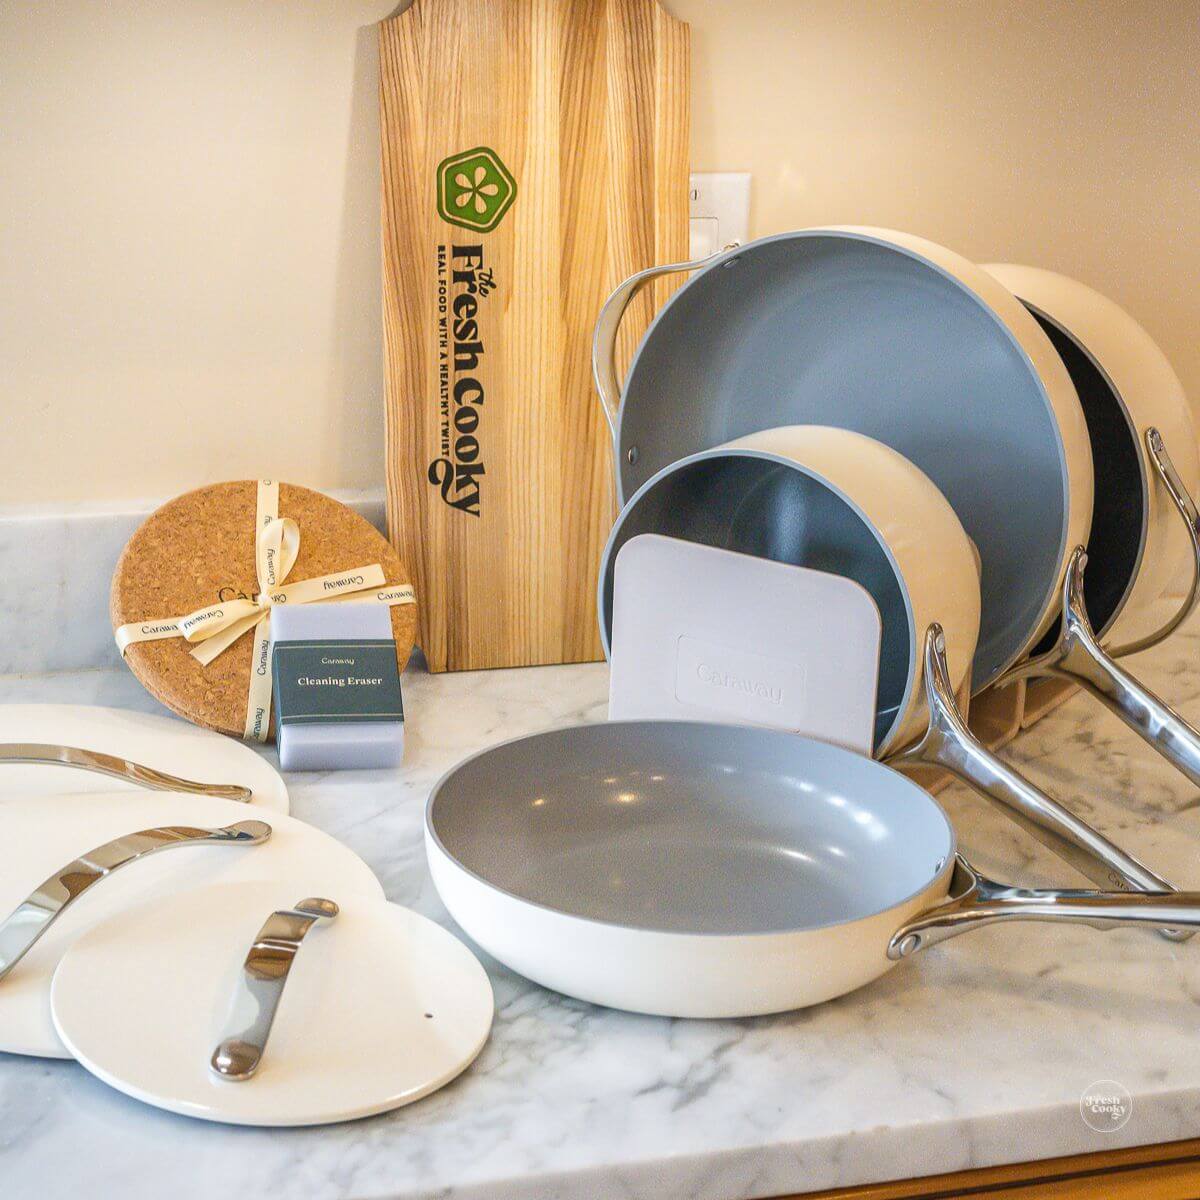 Caraway home cookware on display with magnetic holders, cork trivets and cleaning sponge.